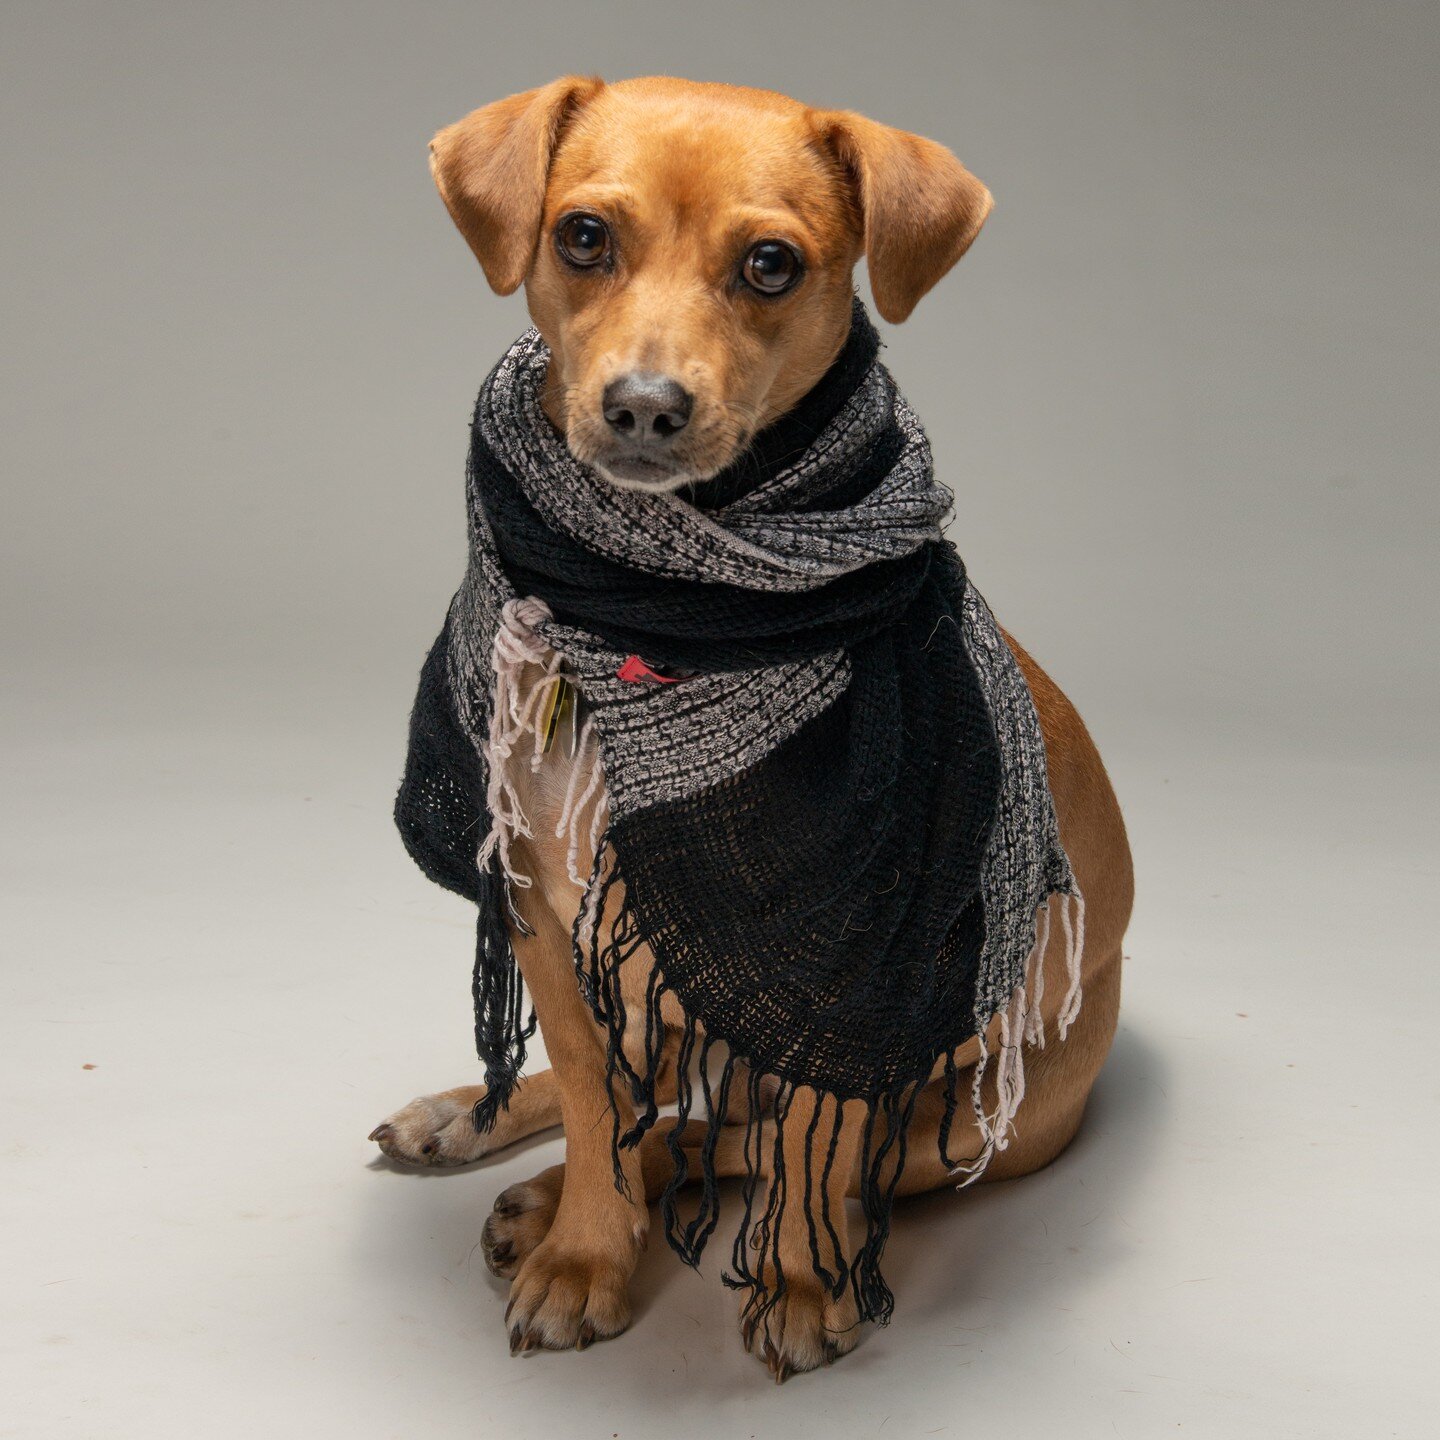 Trying to Stay warm..

You&rsquo;re going to love Nugget! He is a real Gem!

🐶❤️🐶 Male Puggle / Jack Russell mix about one and a half years old. 20 lbs
🐶❤️🐶 Very friendly, happy, demeanor
🐶❤️🐶 Calm, well-mannered , and house trained. Neutered, 